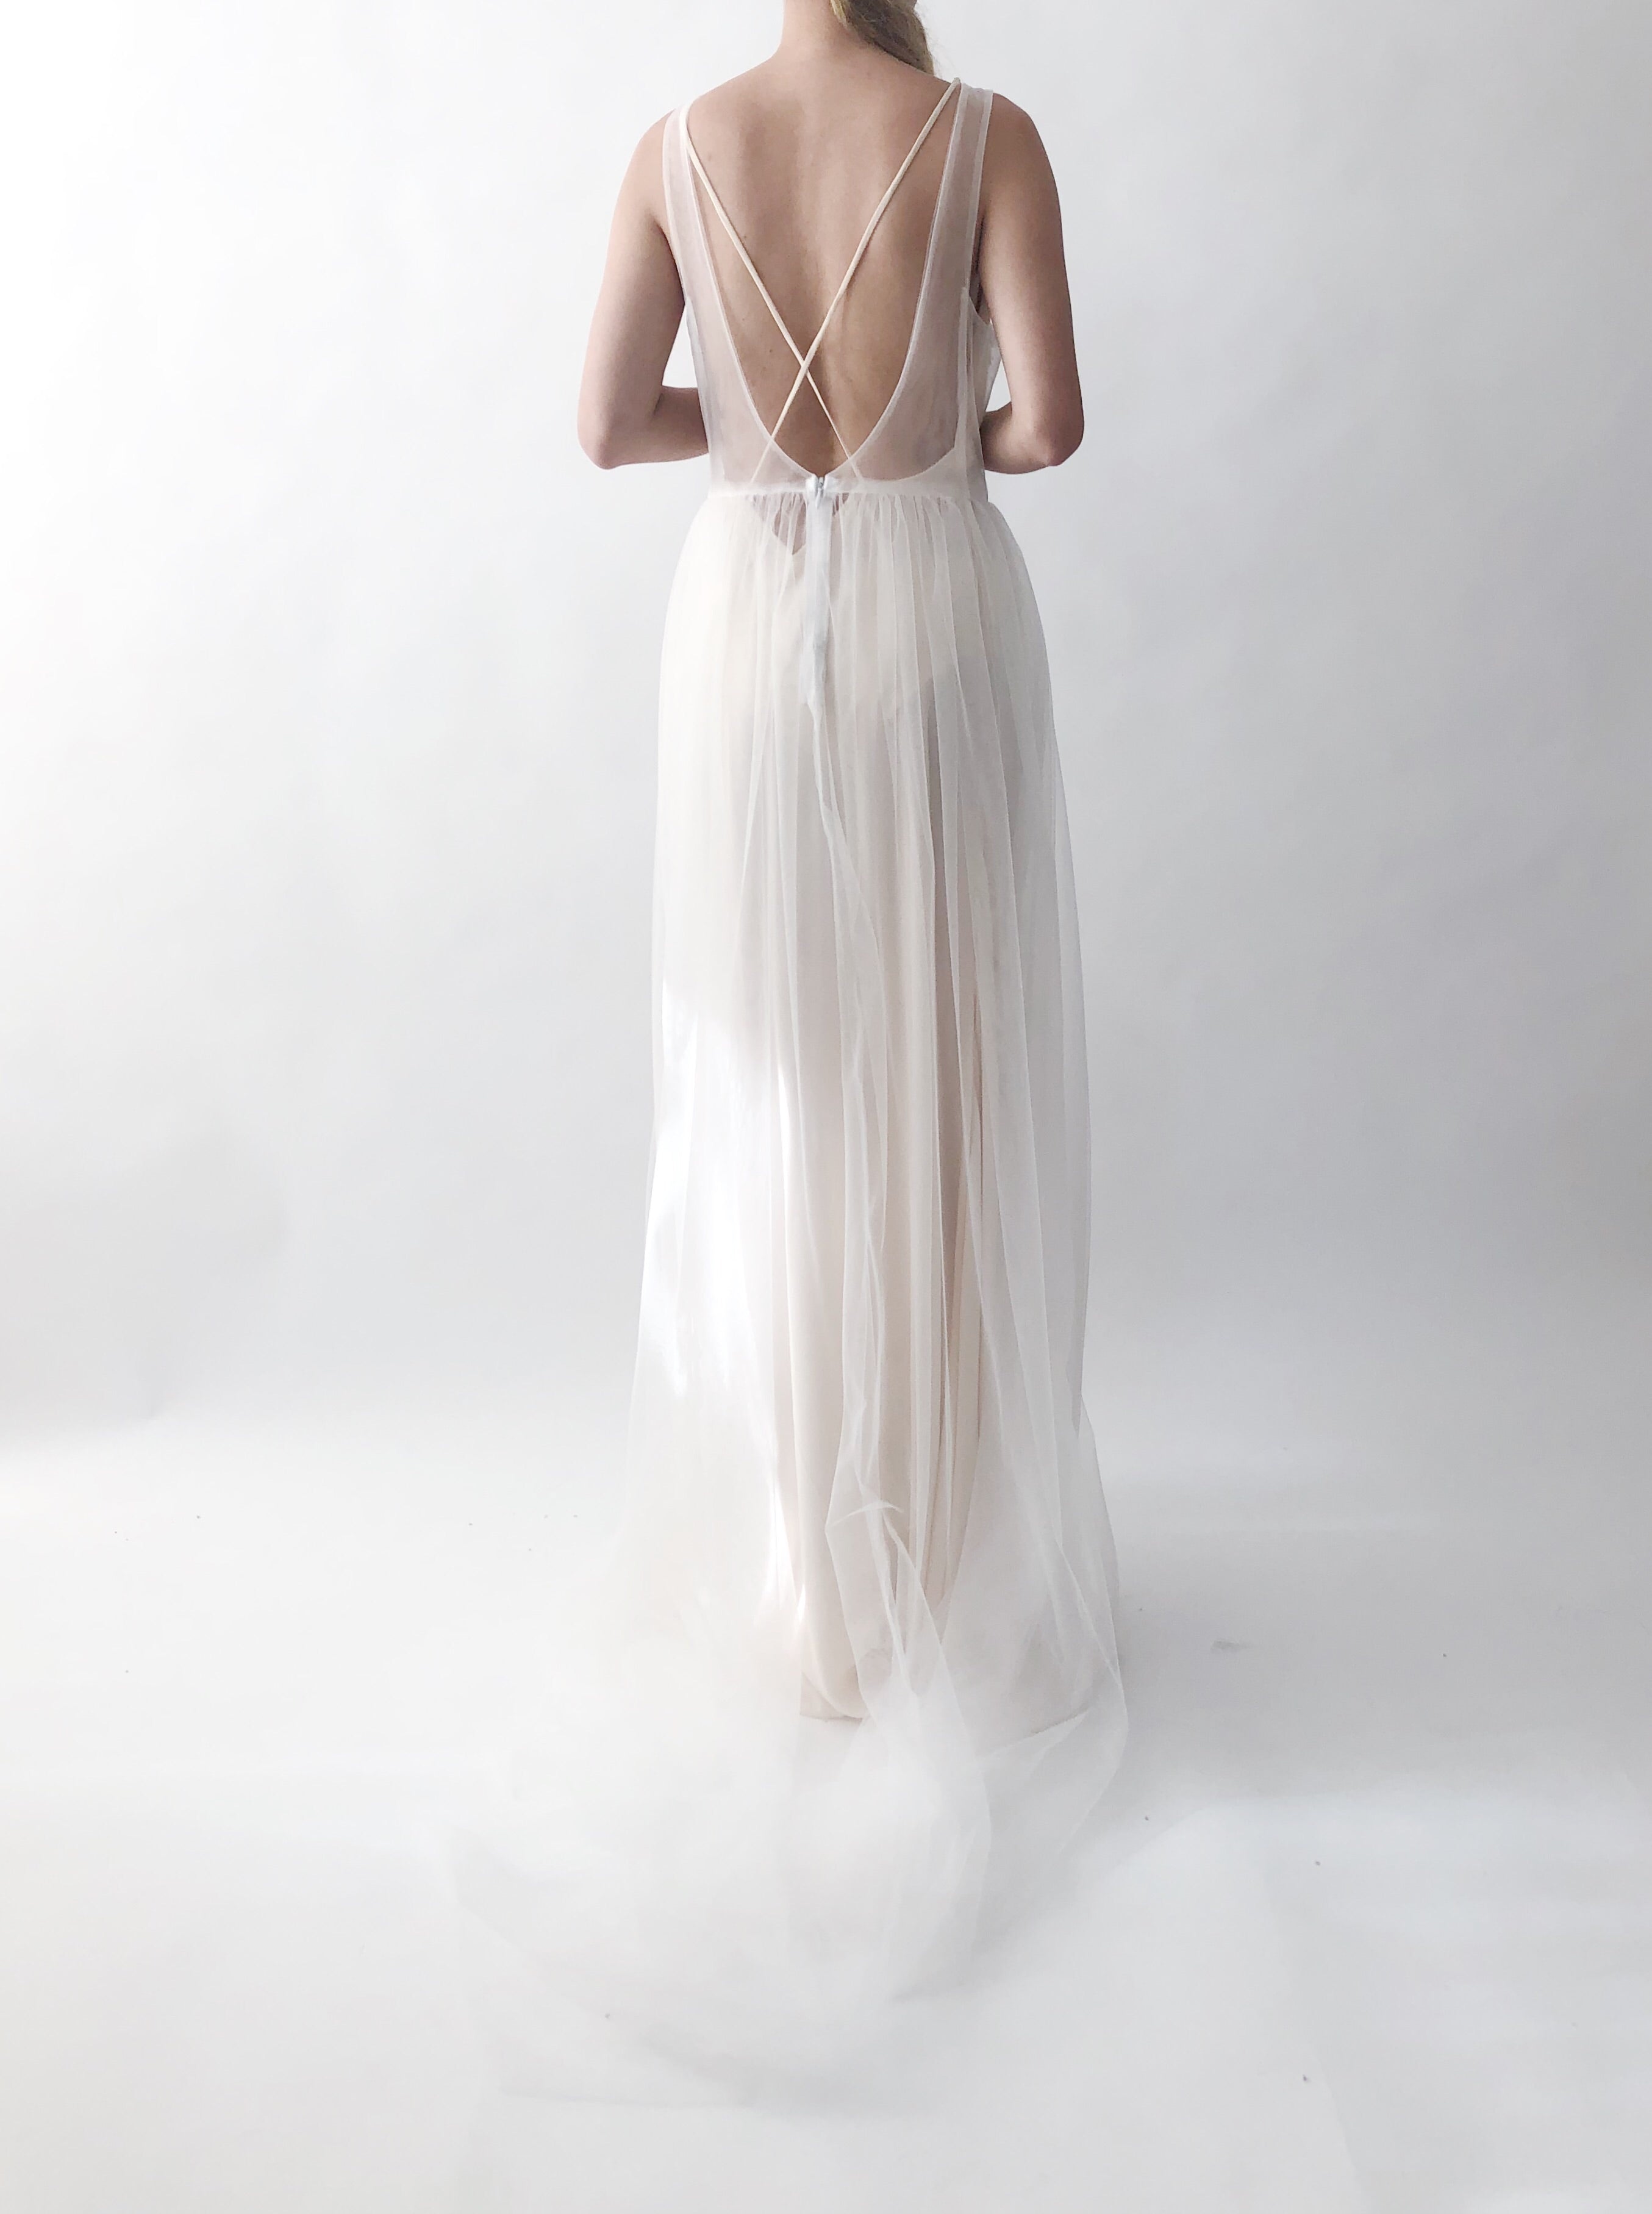 GOSSAMER Sheer Ivory Tulle Gown with Appliqué - 4/6